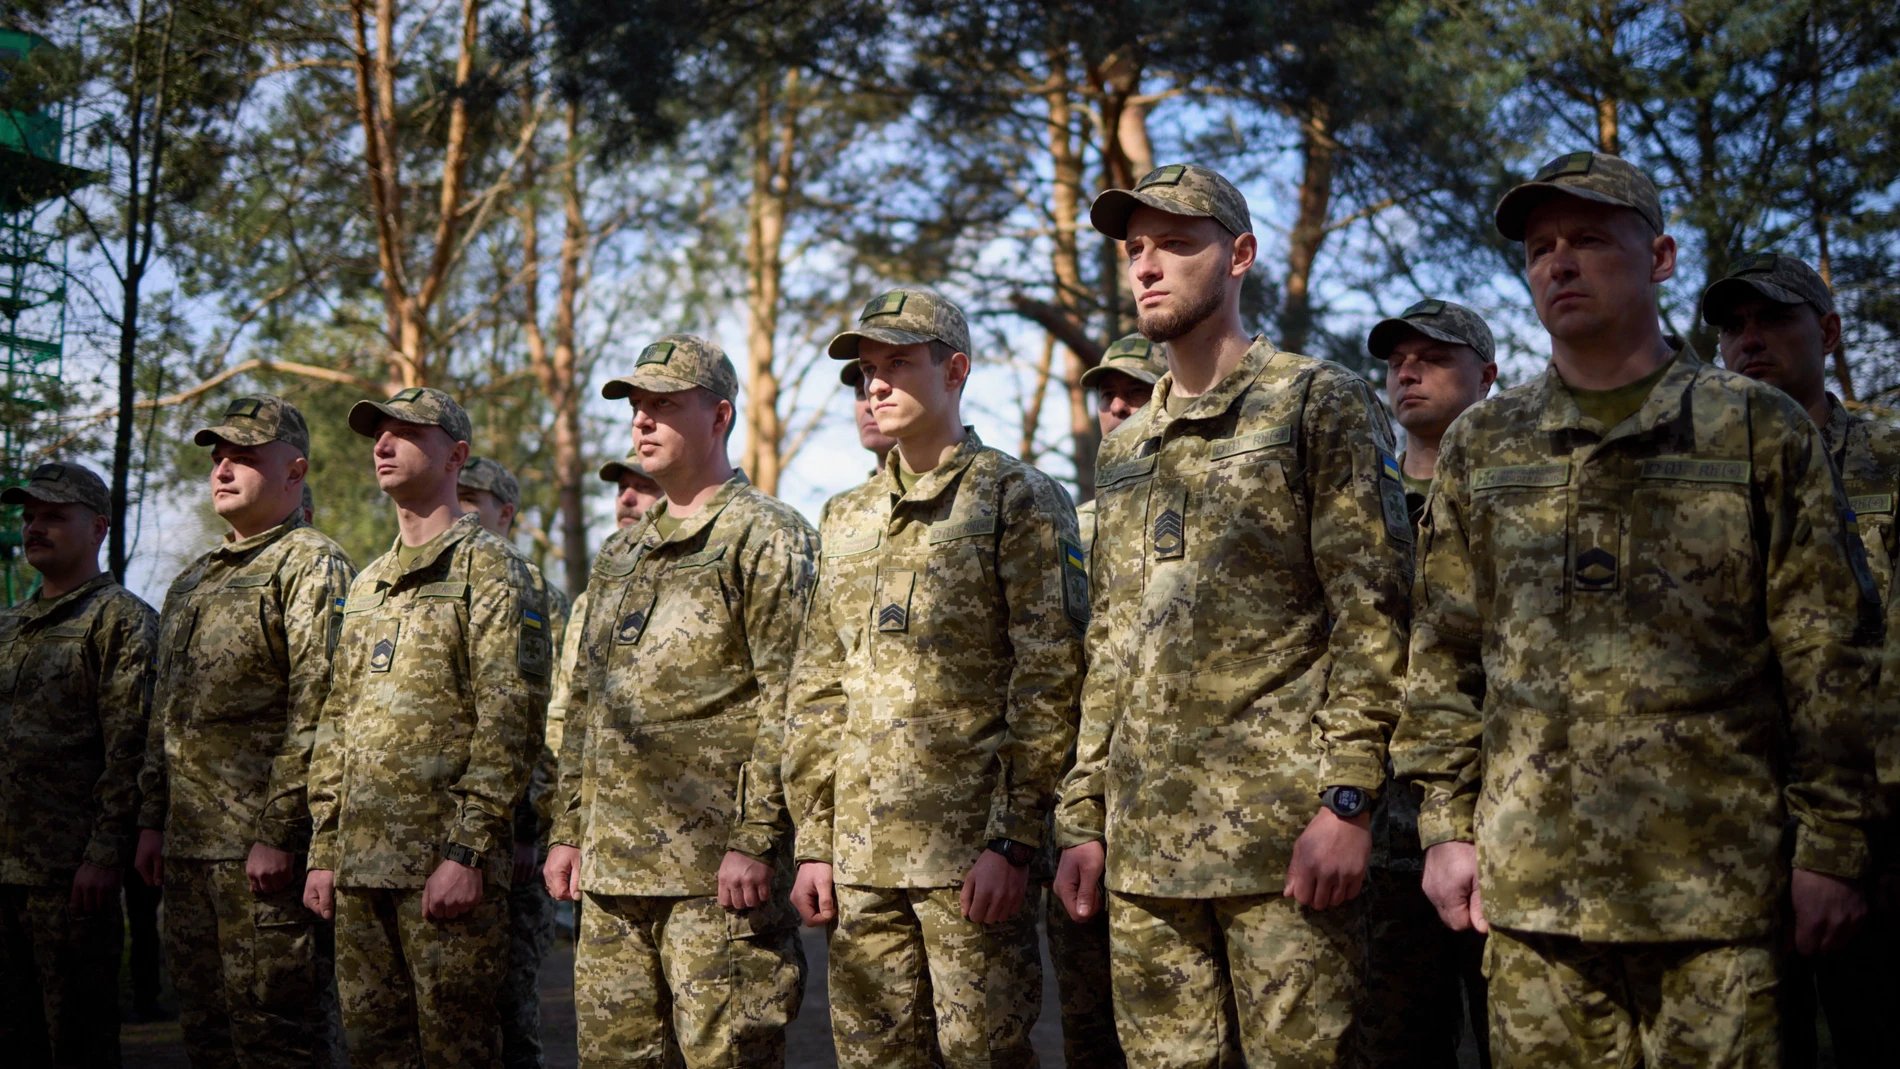 Volyn (Ukraine), 19/04/2023.- A handout photo made available by Ukraine's Presidential Press Service shows Ukraine's servicemen during a visit by Ukraine's President Volodymyr Zelensky (not pictured) to the Volyn region, North-Western Ukraine, 19 April 2023, amid the Russian invasion. Zelensky visited the area where Ukraine borders both Poland and Belarus. Russian troops entered Ukrainian territory in February 2022, starting a conflict that has provoked destruction and a humanitarian crisis. (Bielorrusia, Polonia, Rusia, Ucrania) EFE/EPA/PRESIDENTIAL PRESS SERVICE HANDOUT HANDOUT HANDOUT EDITORIAL USE ONLY/NO SALES